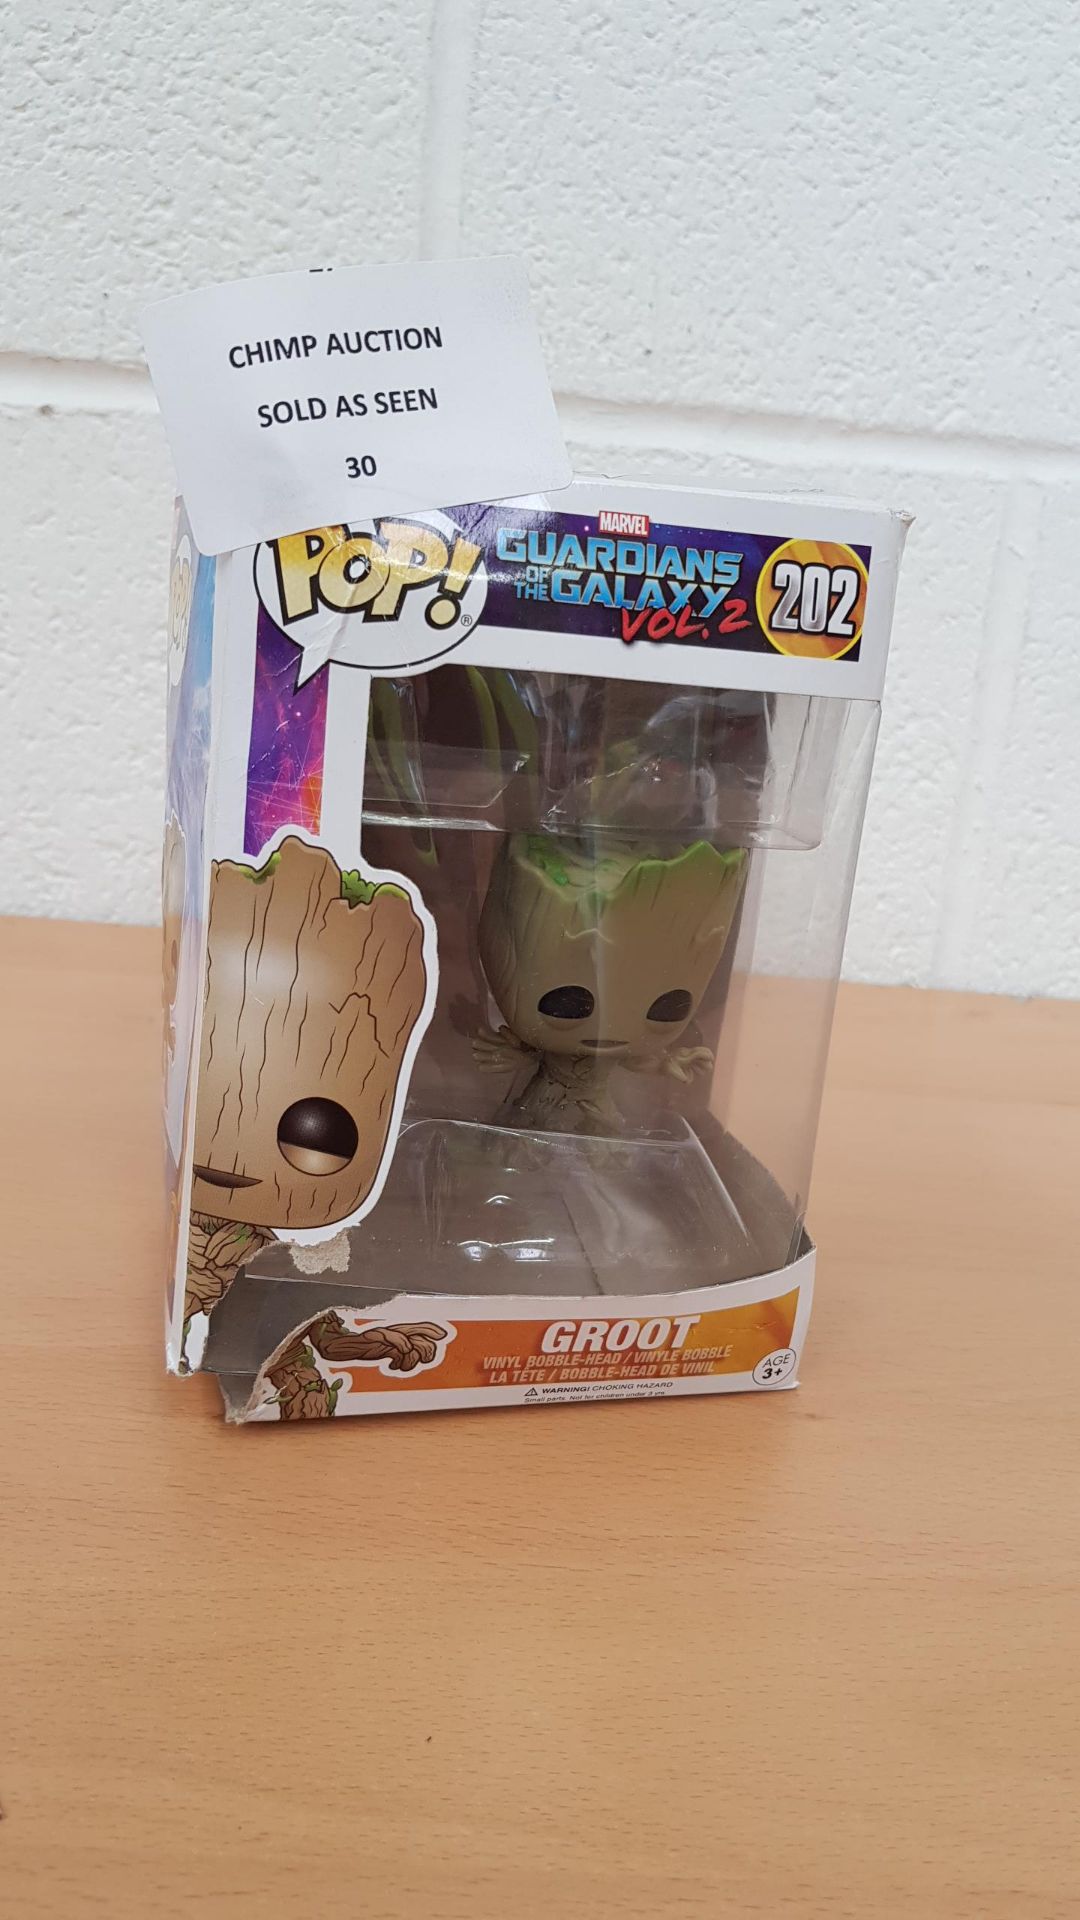 Pop! Marvel Guardians of the Galaxy Vol.2 202 Groot collector's figure